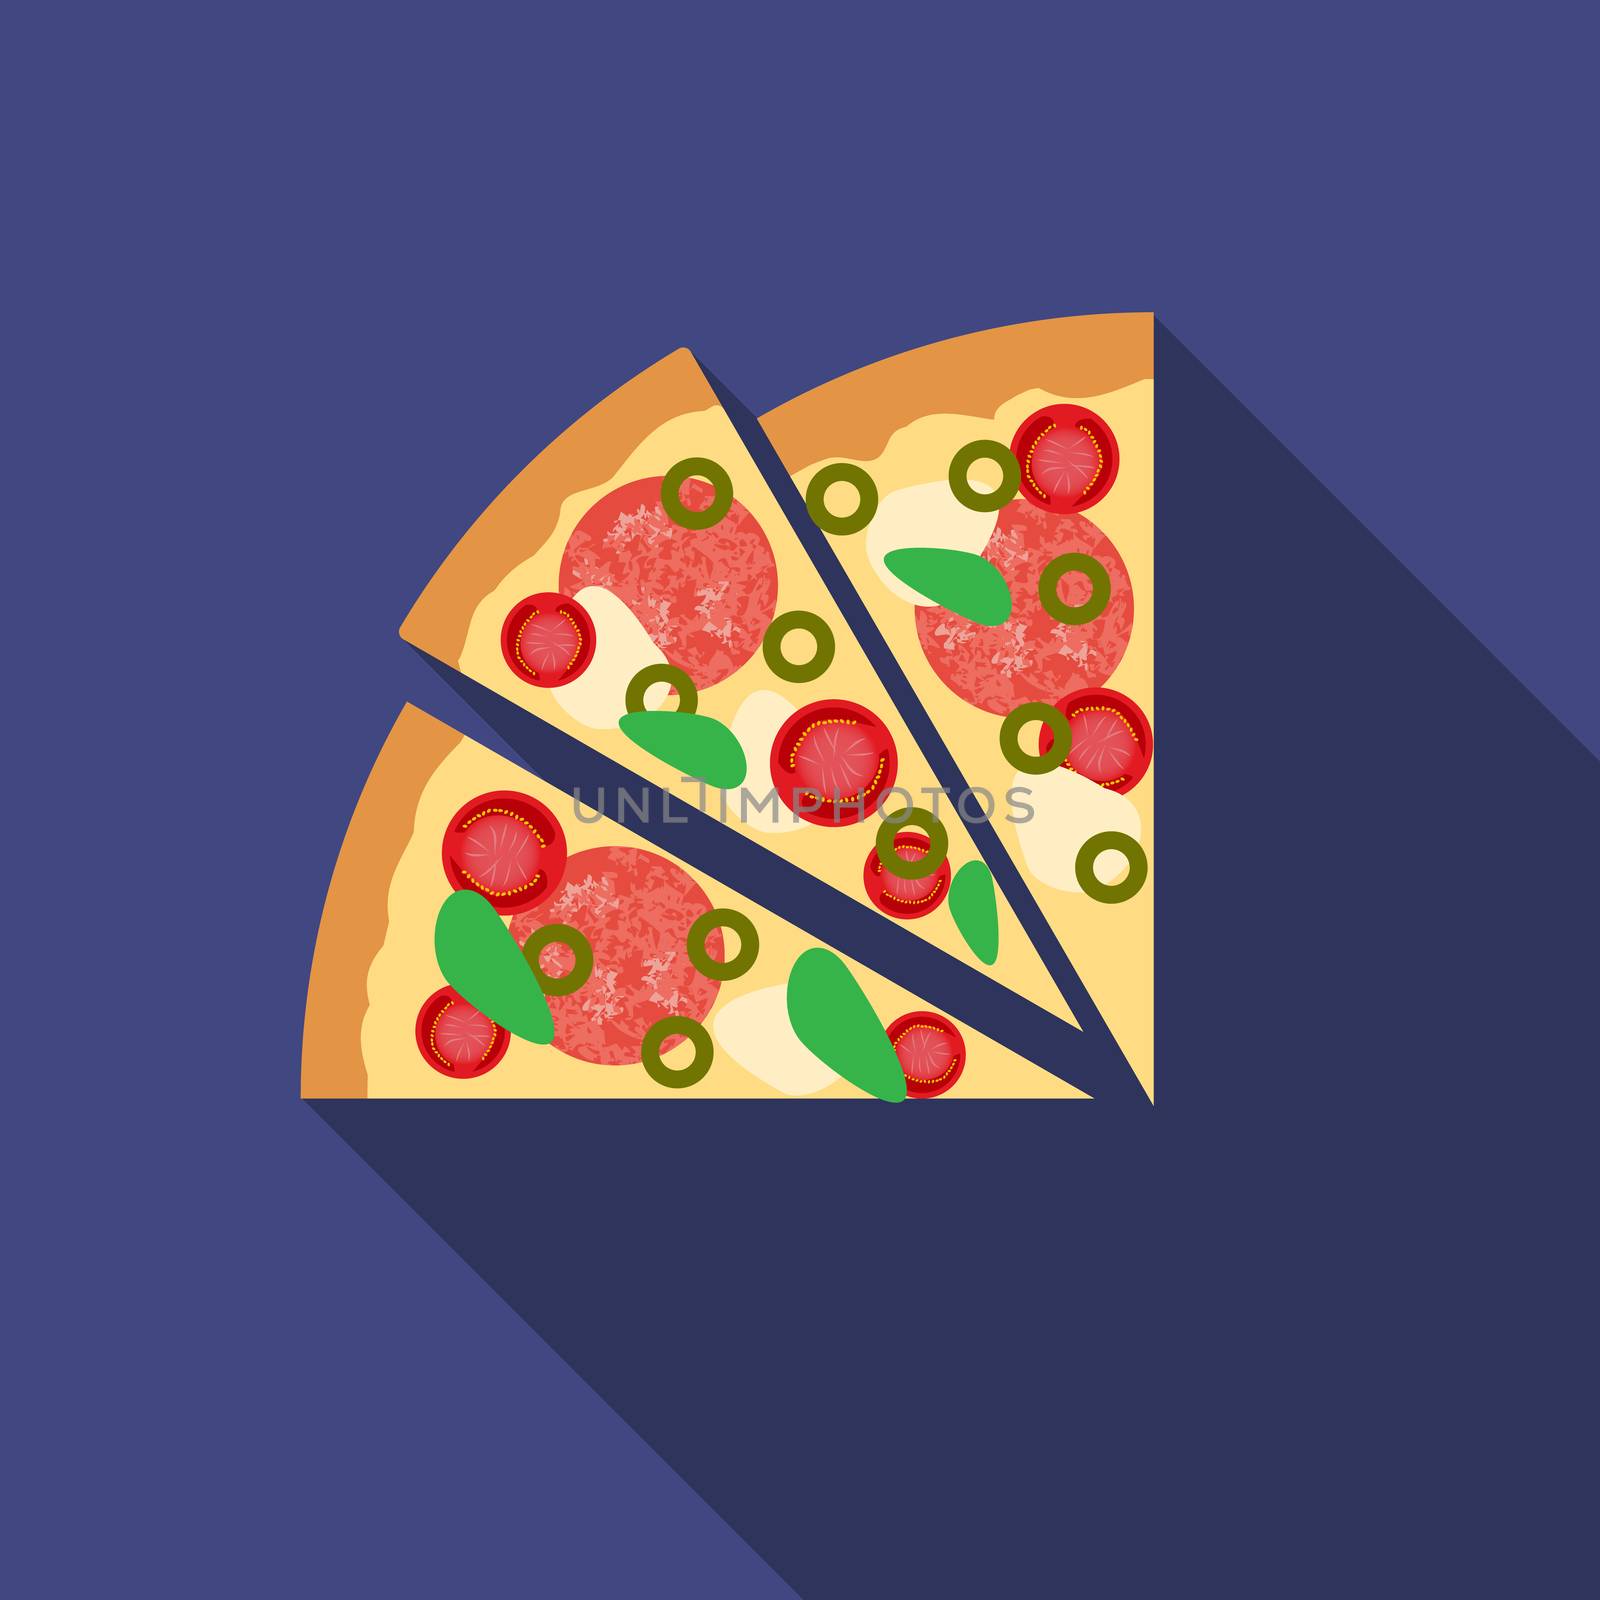 Flat design vector pizza icon with long shadowFlat design vector vinyl record icon with long shadow by Lemon_workshop